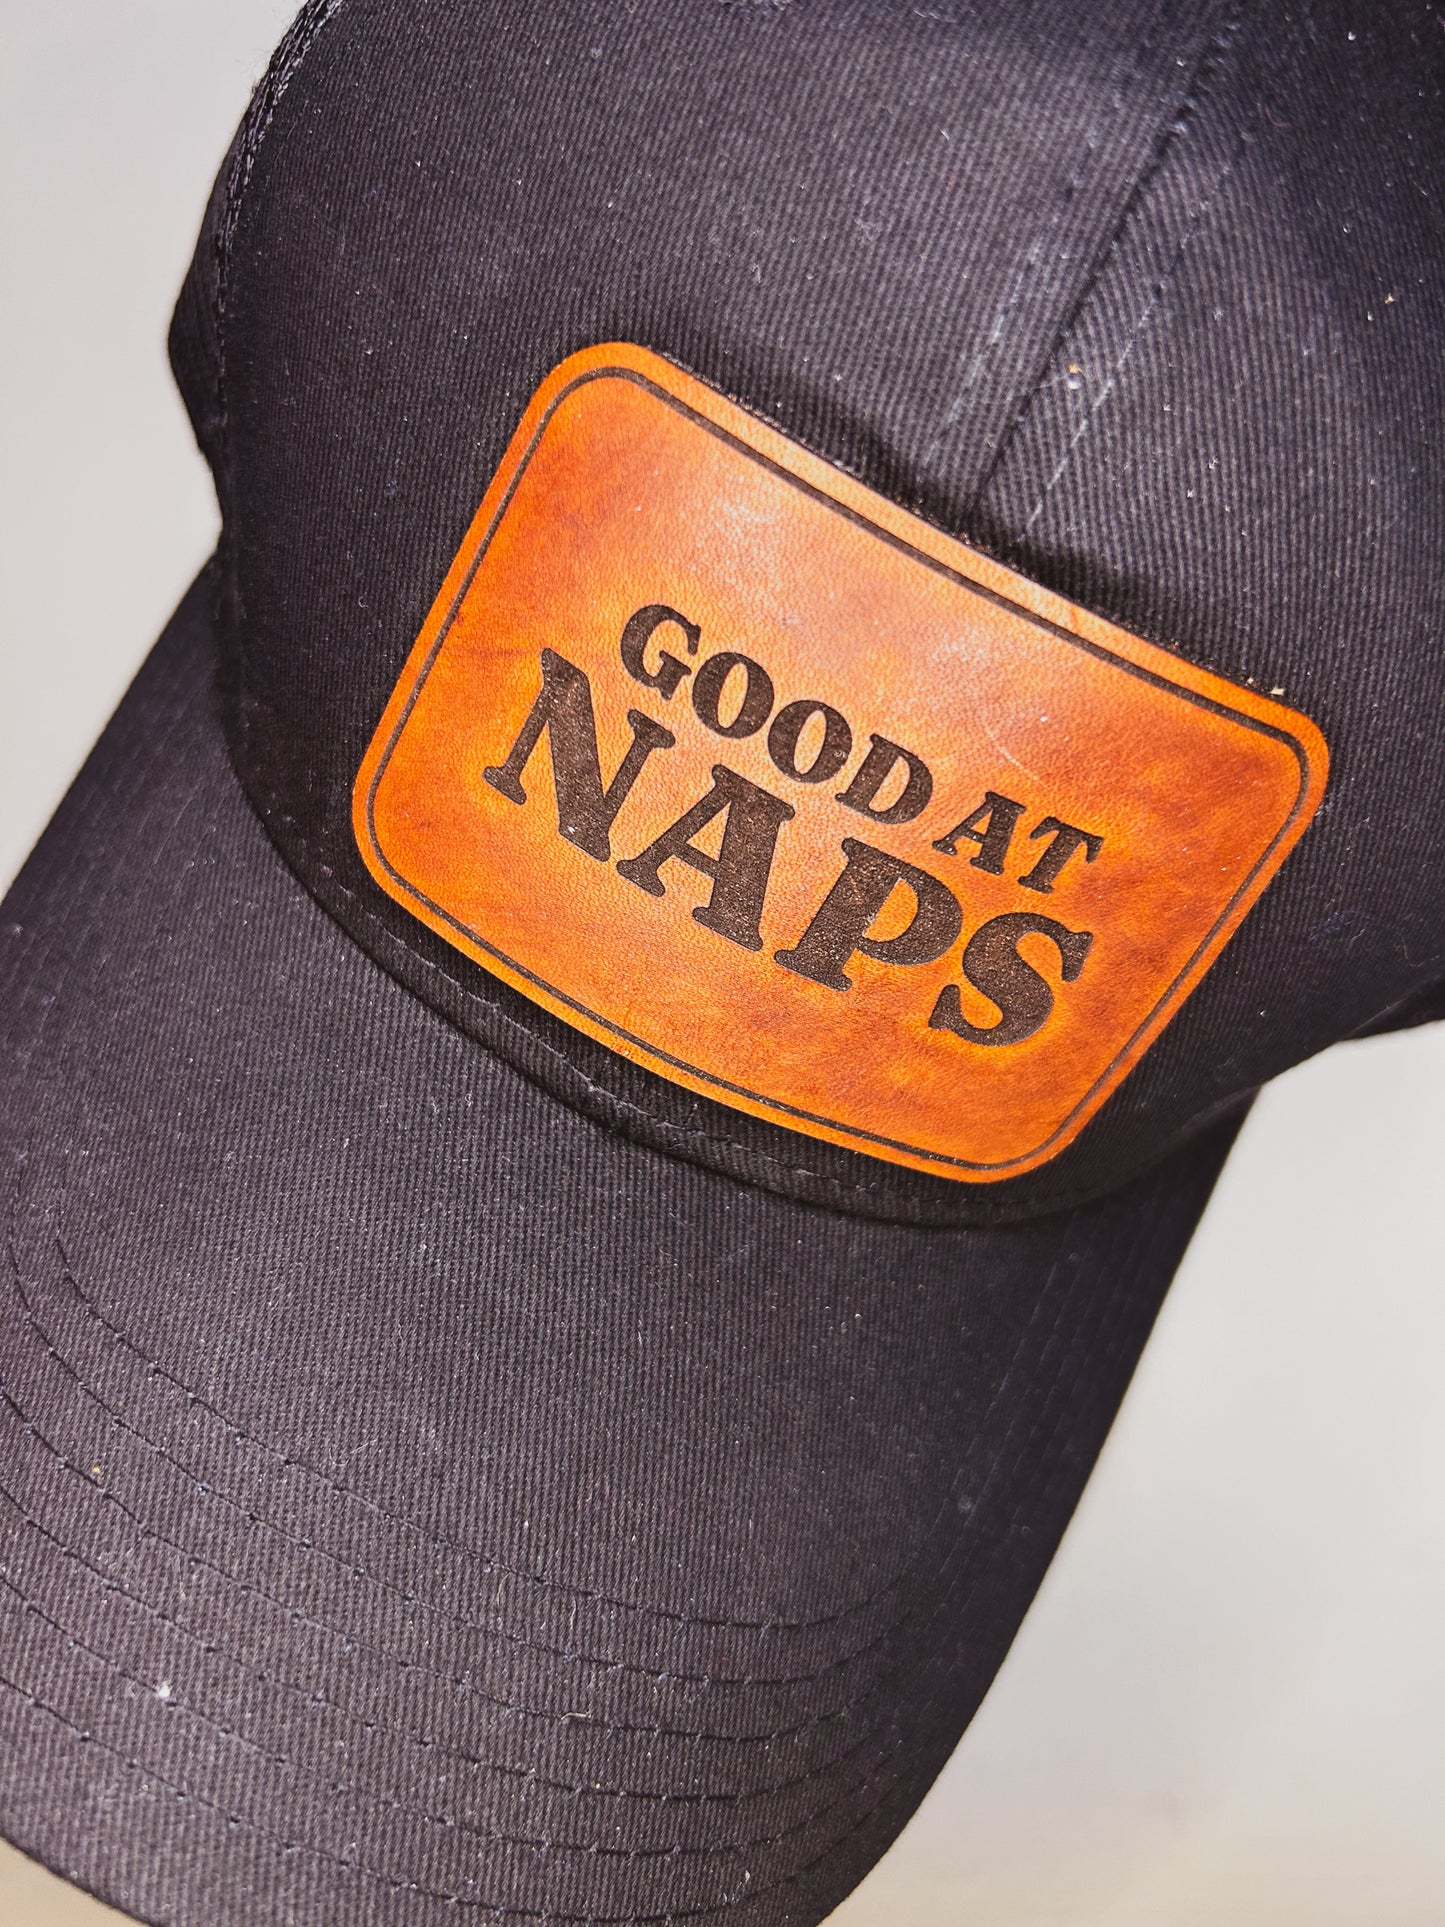 Good At Naps Leather Patch on Black Baseball Hat